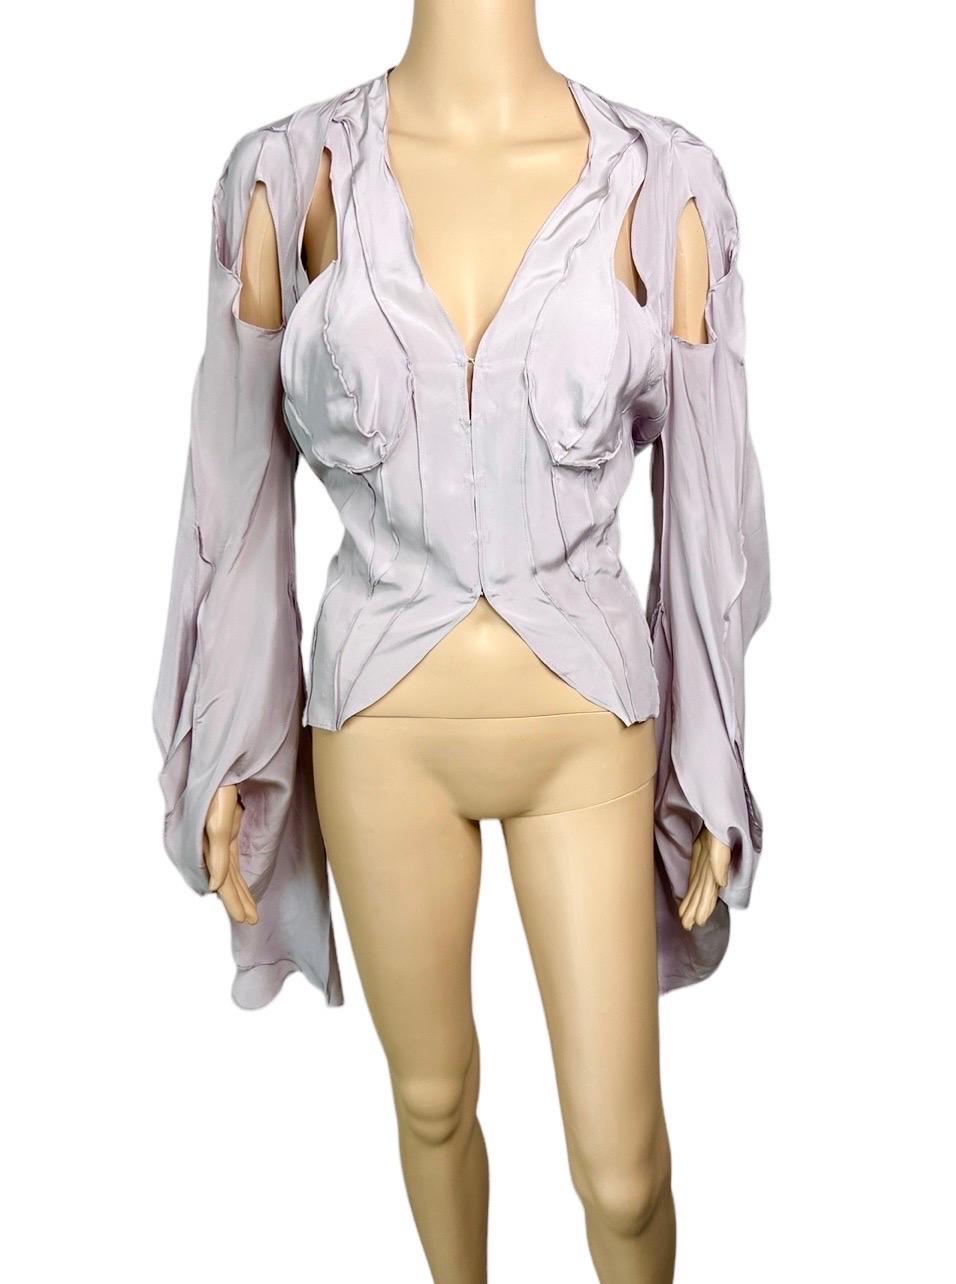 Tom Ford for Yves Saint Laurent YSL S/S 2003 Runway Cutout Shirt Blouse Top For Sale 5